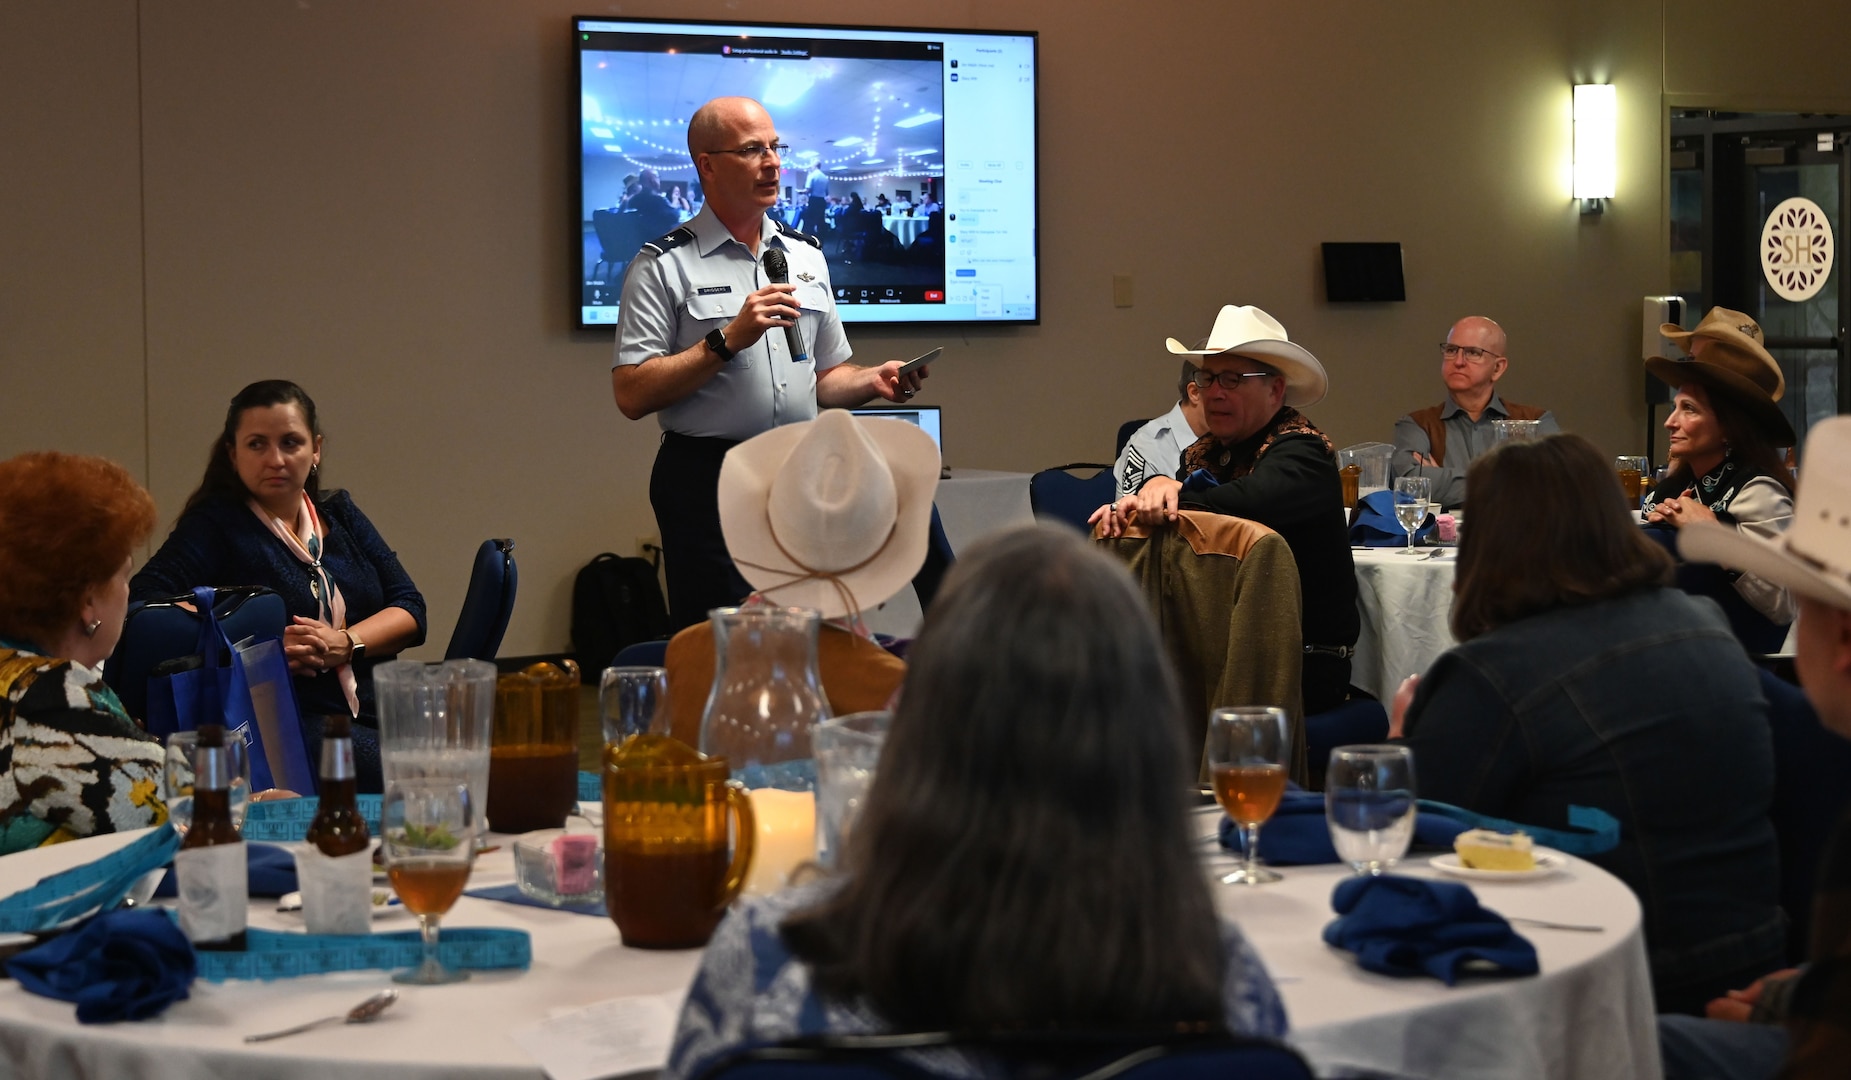 Joint Base San Antonio welcomes 307th Bombardment Group Association reunion